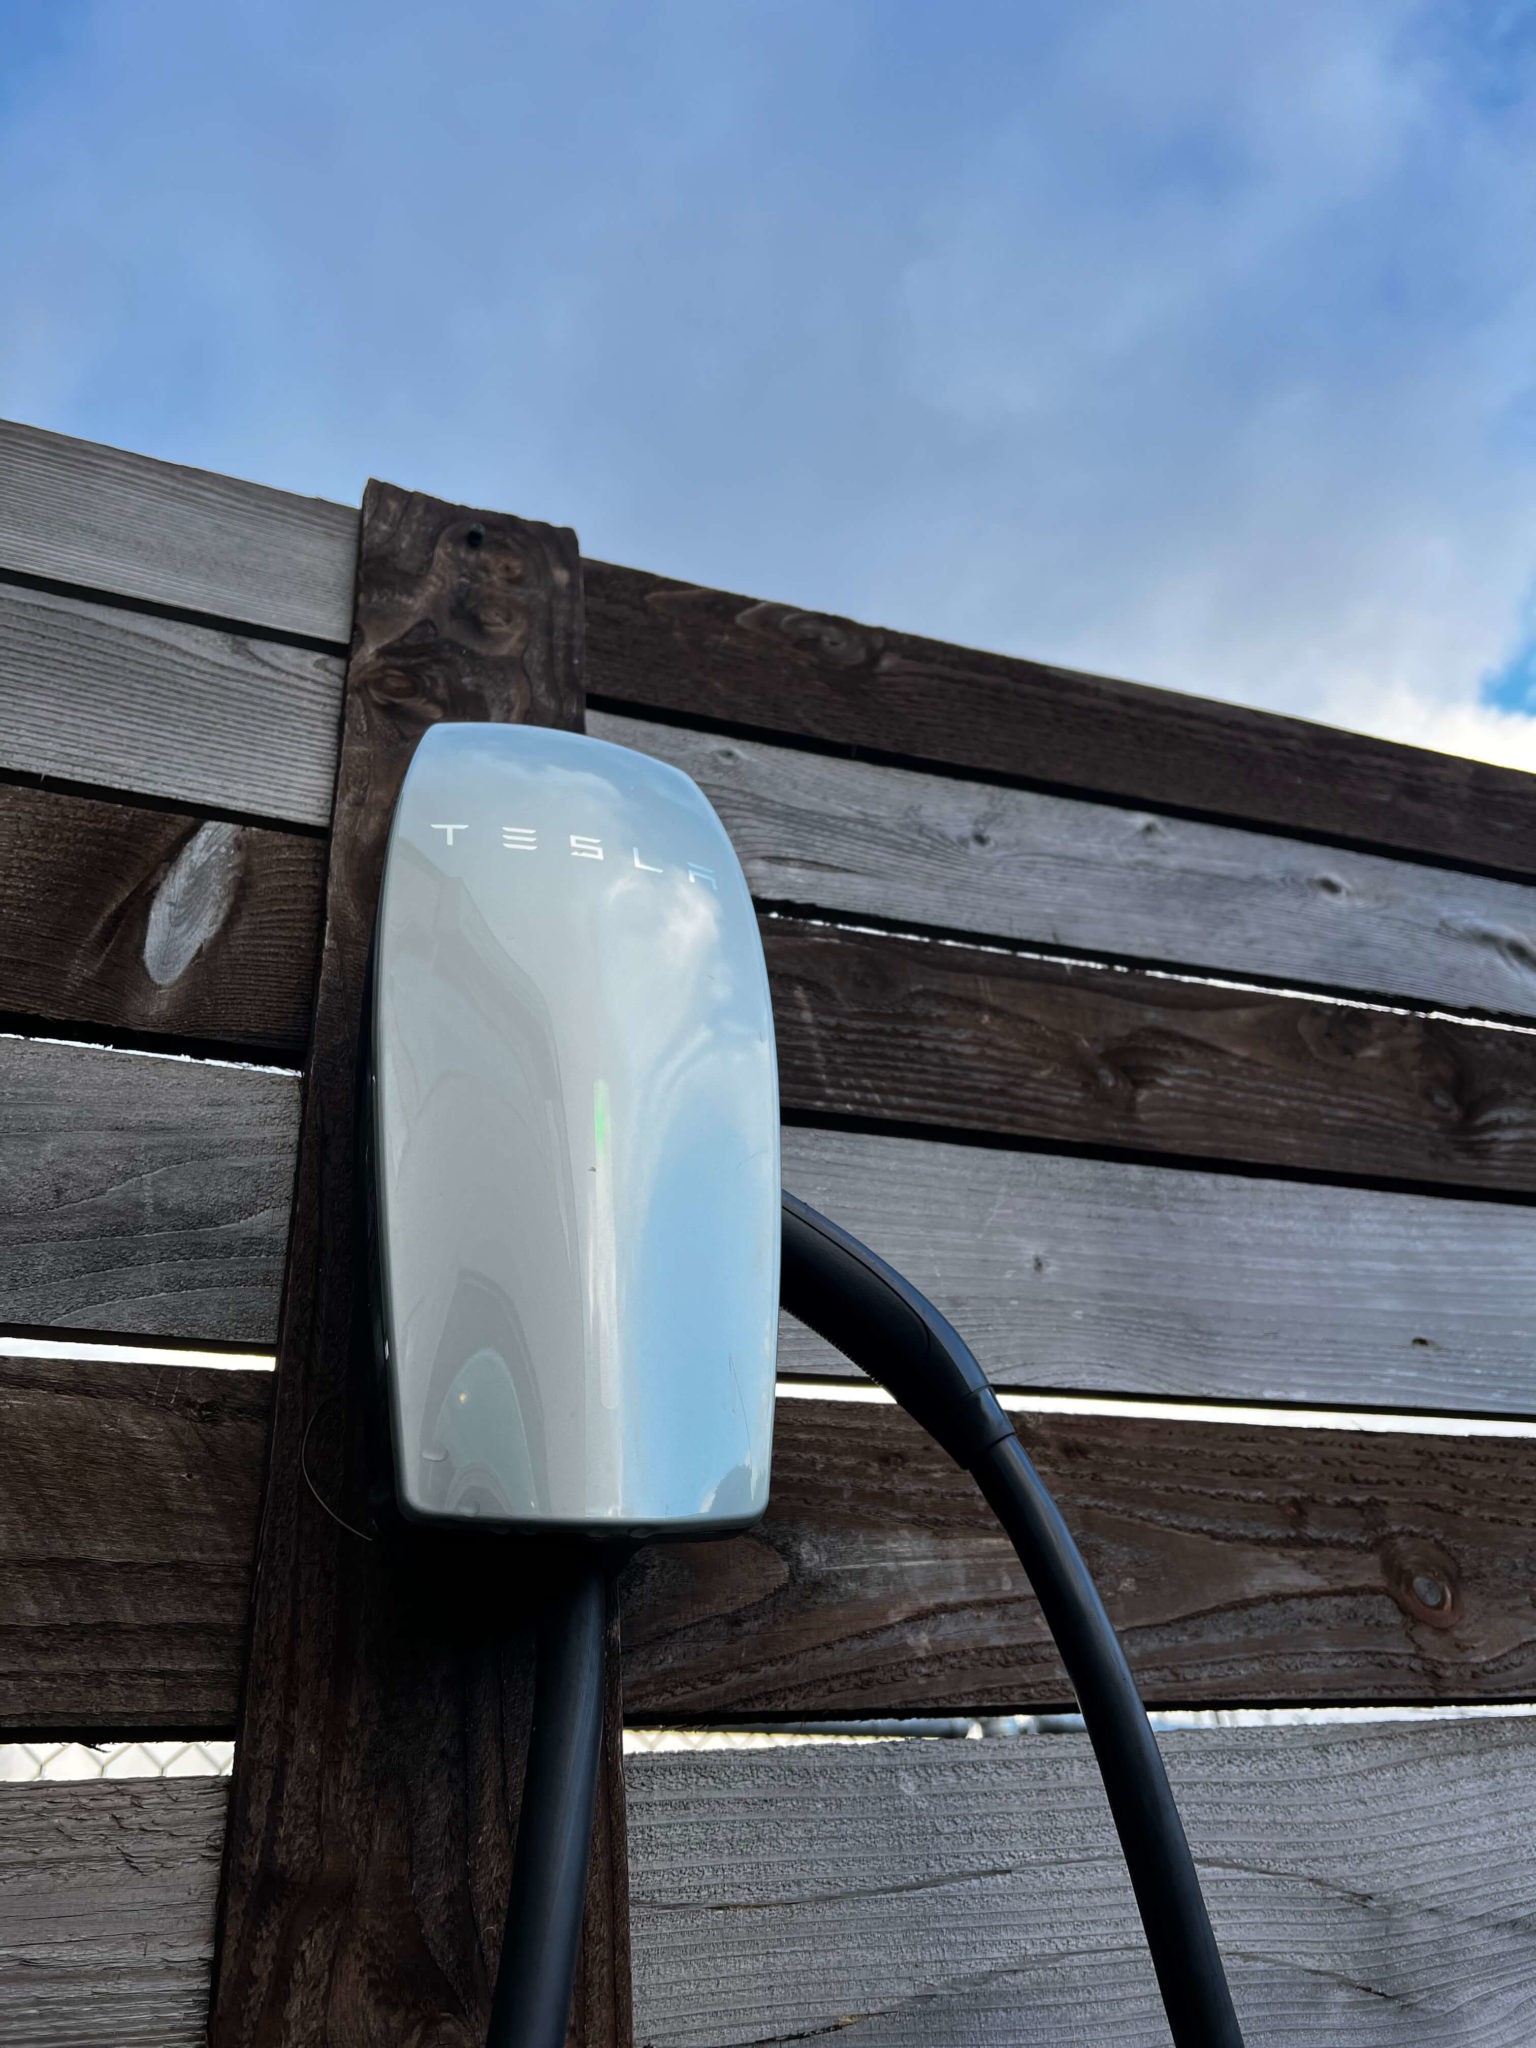 Tesla EV Charger installed outside on wooden post in the pacific northwest